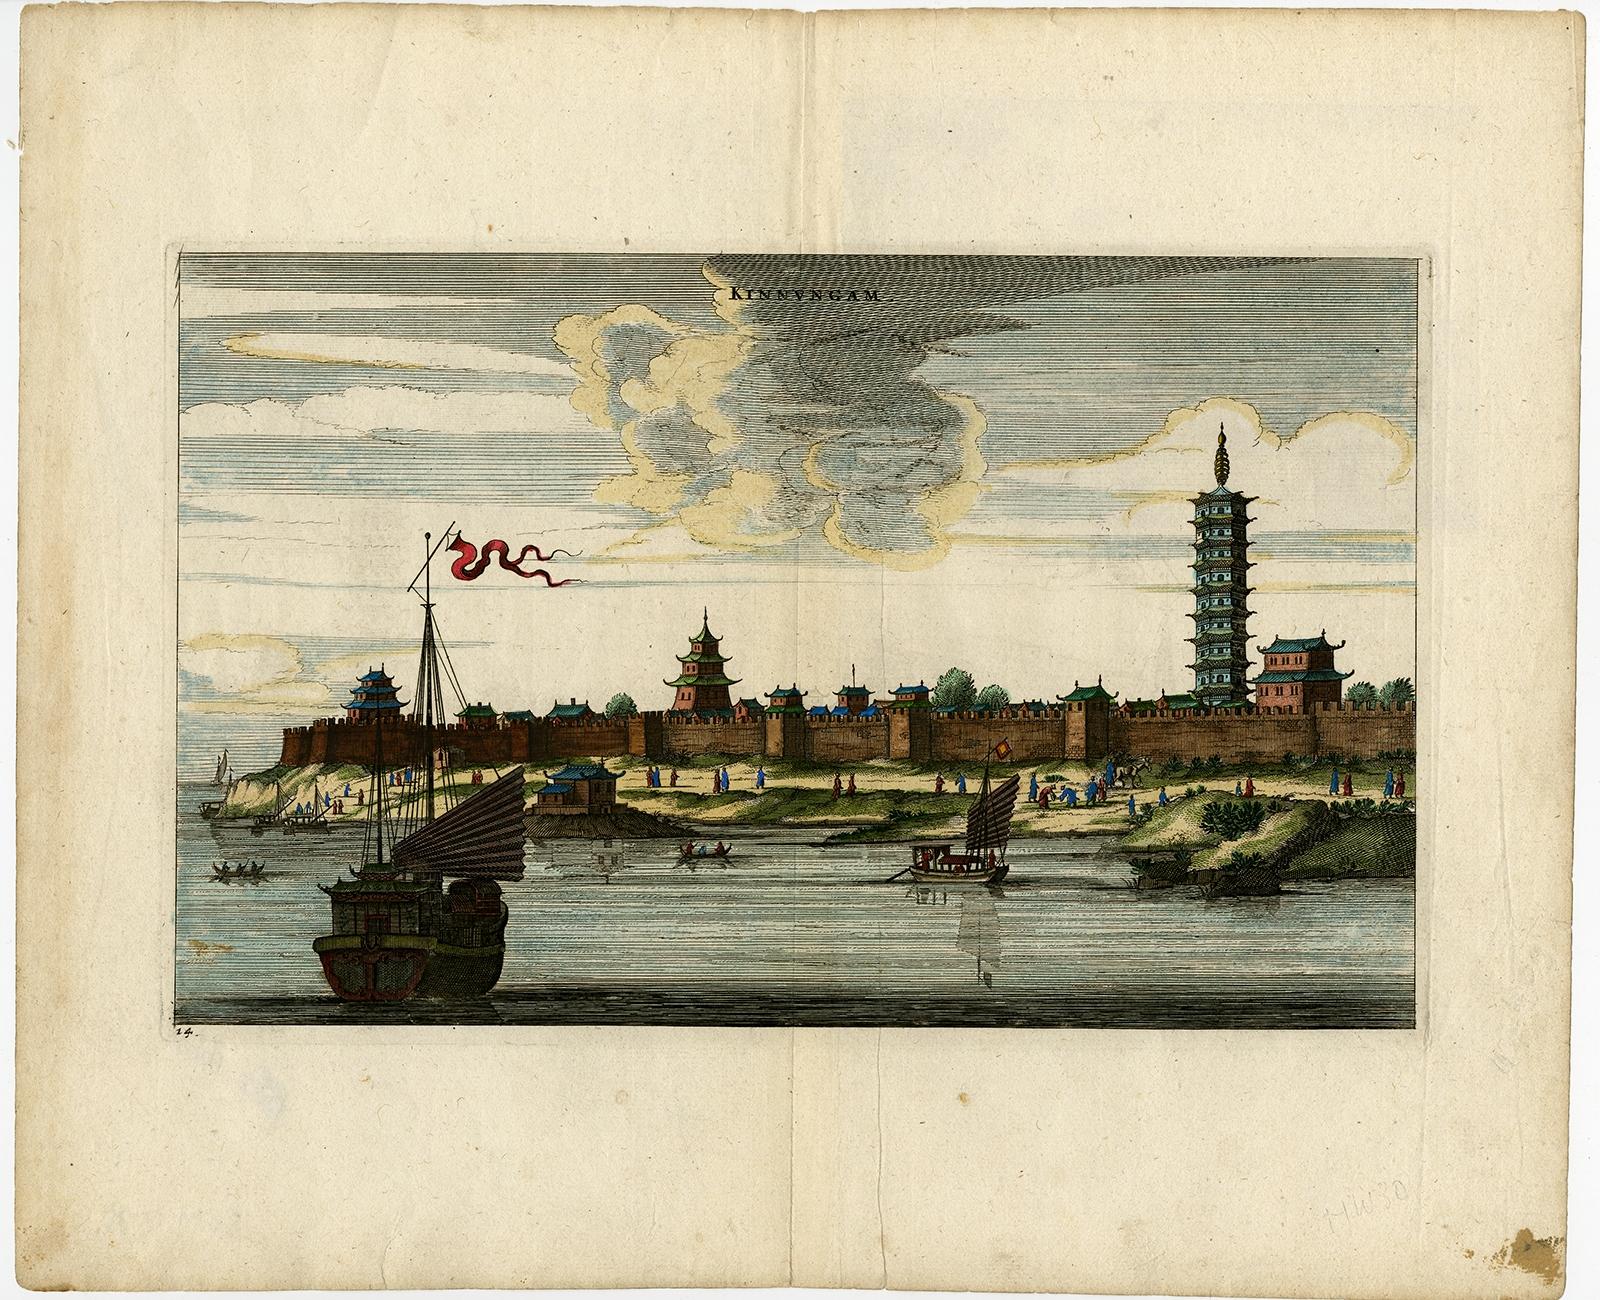 Antique print, titled: 'Kinnungam' 

View of the Chinese city of Kinnungam with its ramparts. Also depicted are ships and a pagoda can be seen as well.

Source unknown, to be determined.

Artists and Engravers: Made by 'Johan Nieuhof' after an